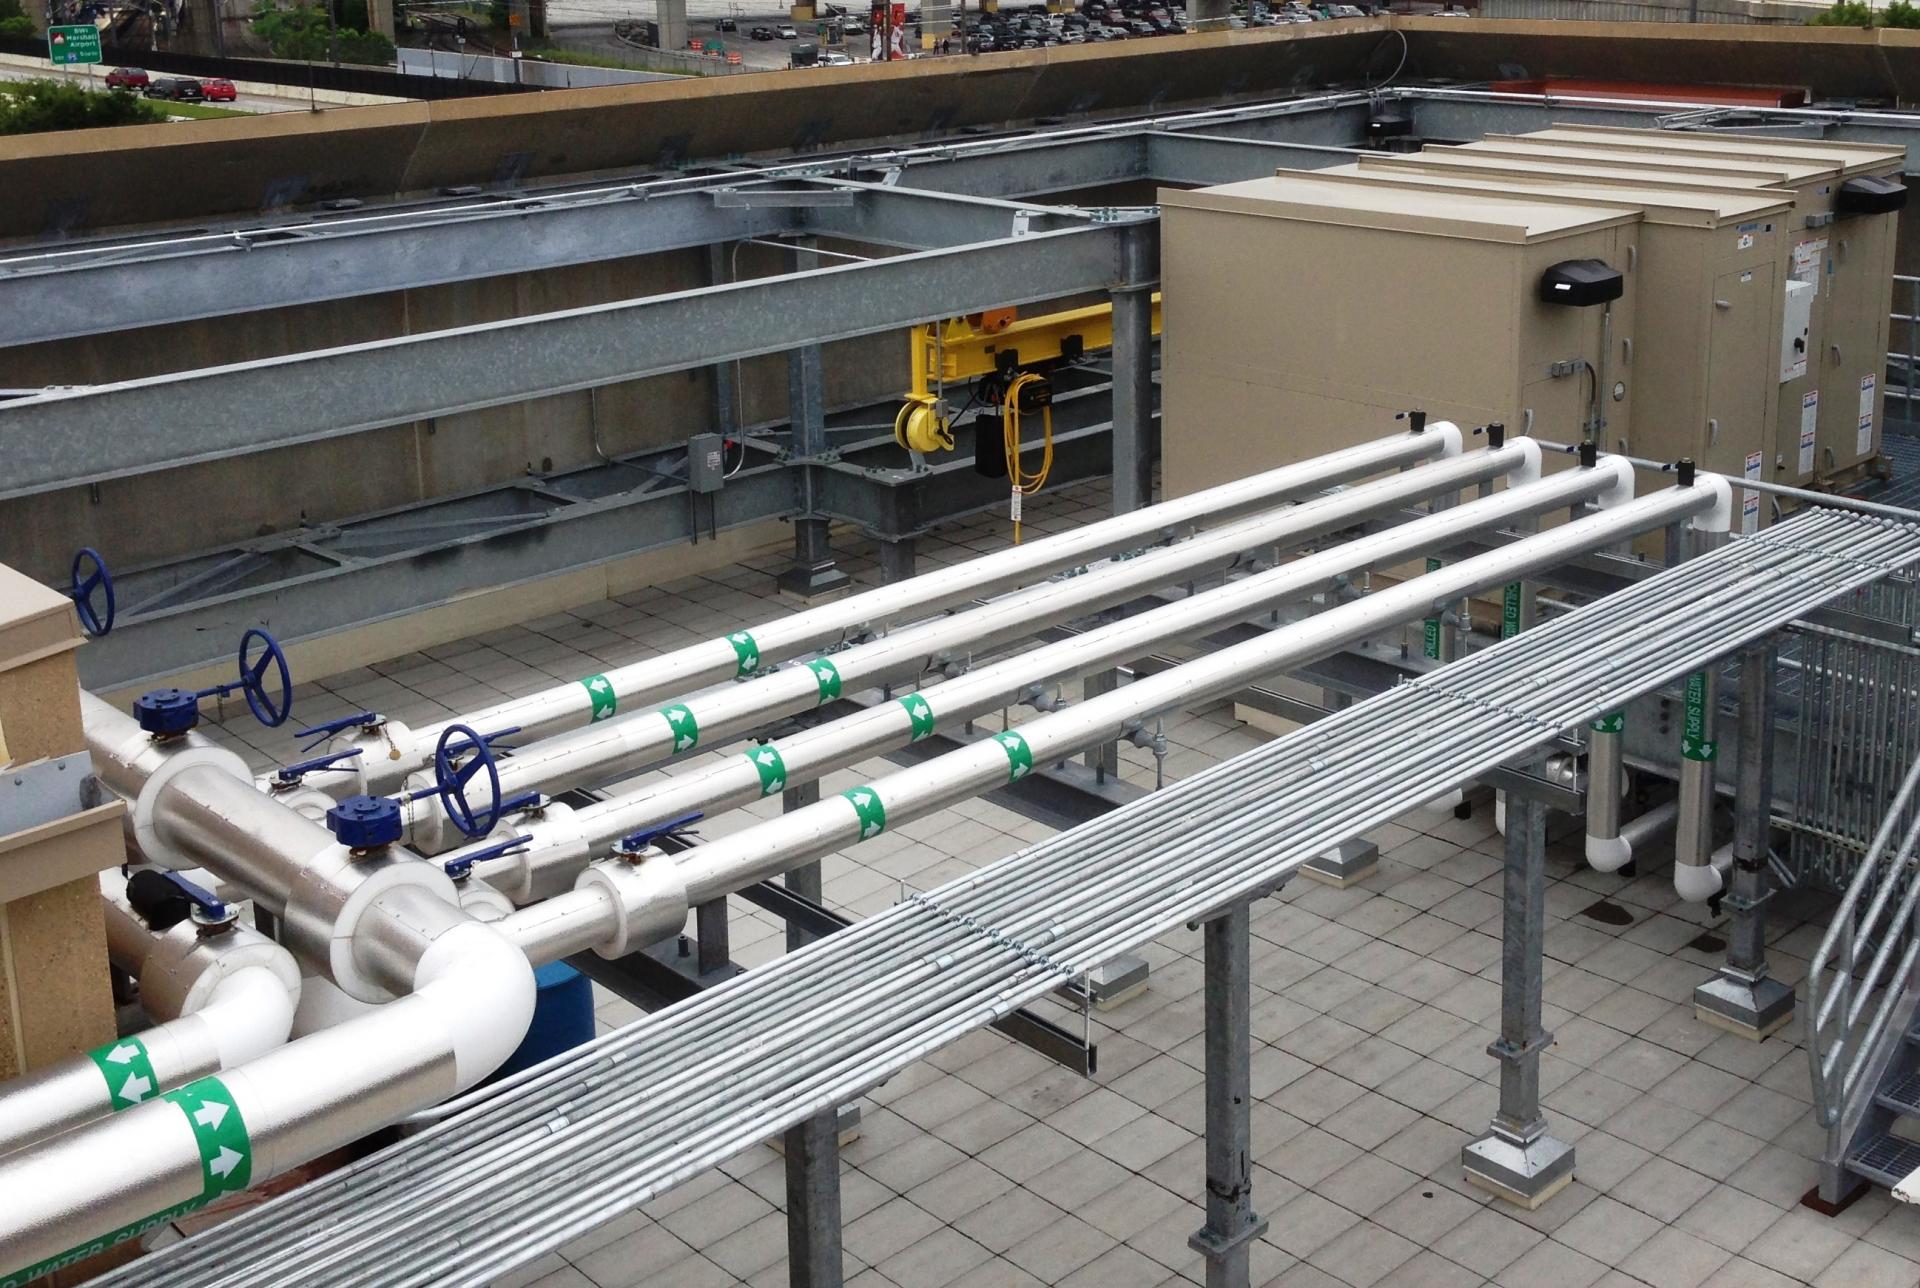 Roof top space is efficiently organized. Overhead pipe routing frees up space.